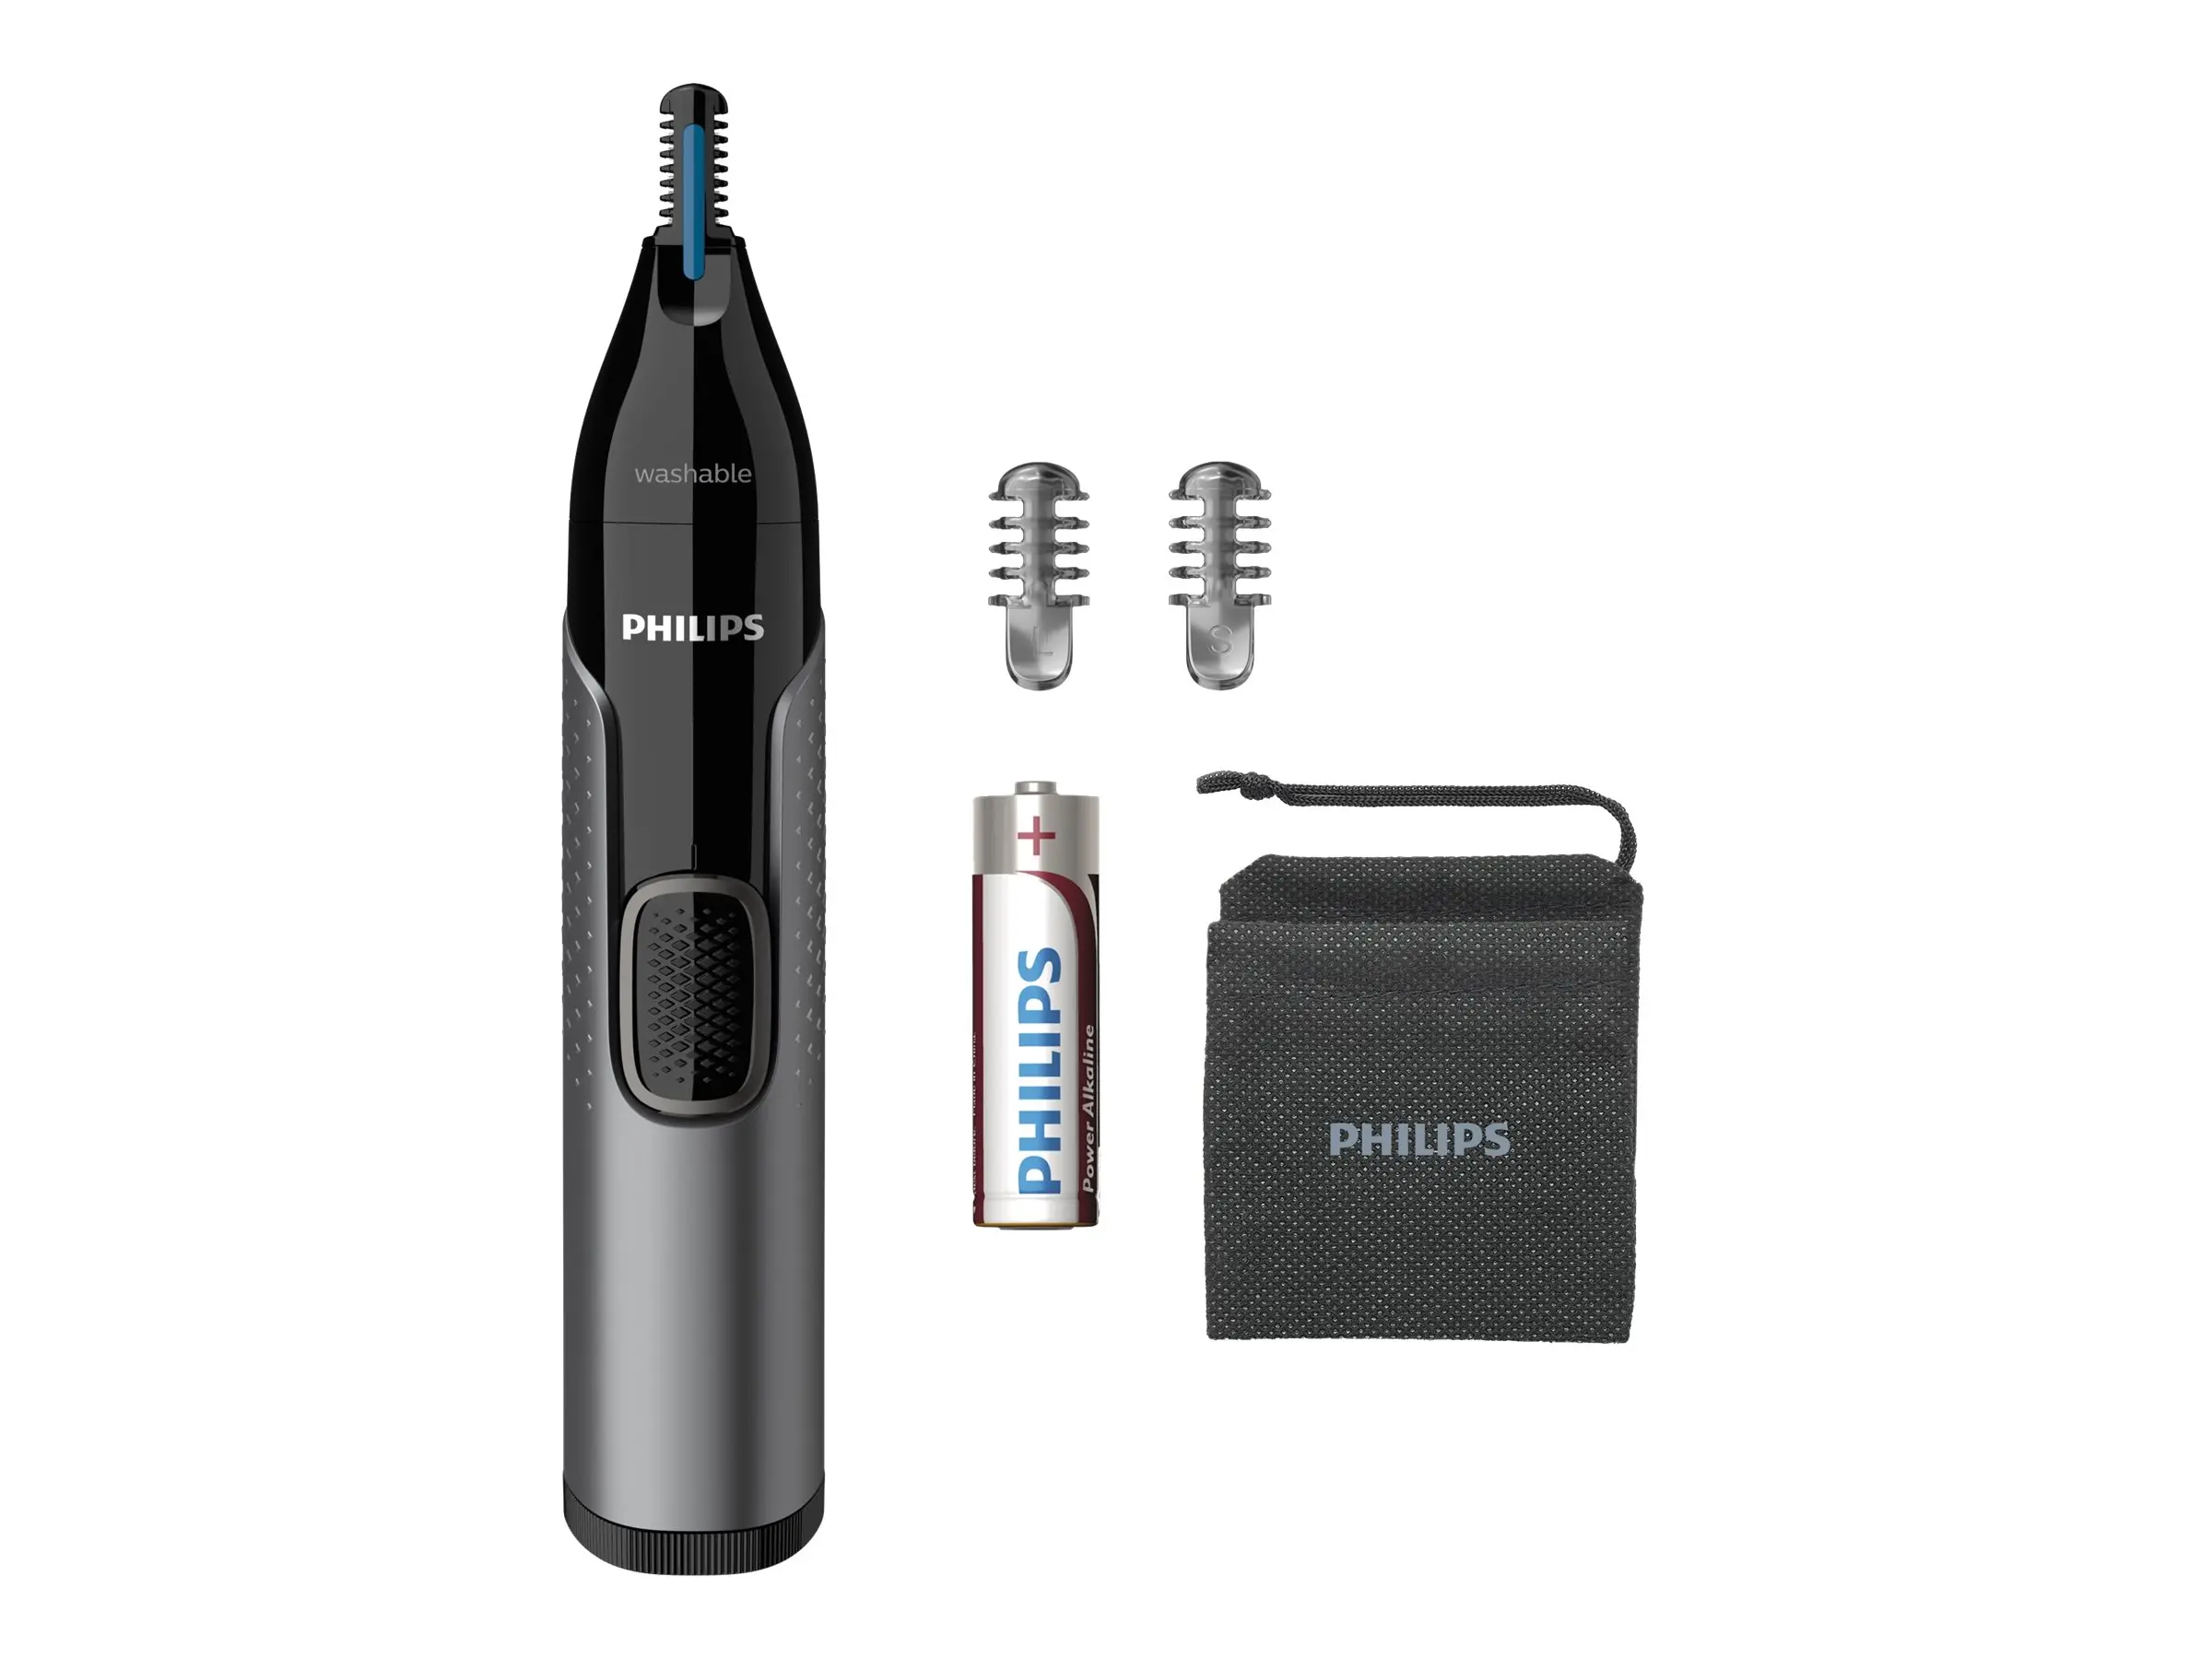 Philips Nose and ear trimmer: 100 waterproof, Dual-sided Protective Guard system, AA-battery included, 2 eyebrow combs 3mm/5mm - image 2